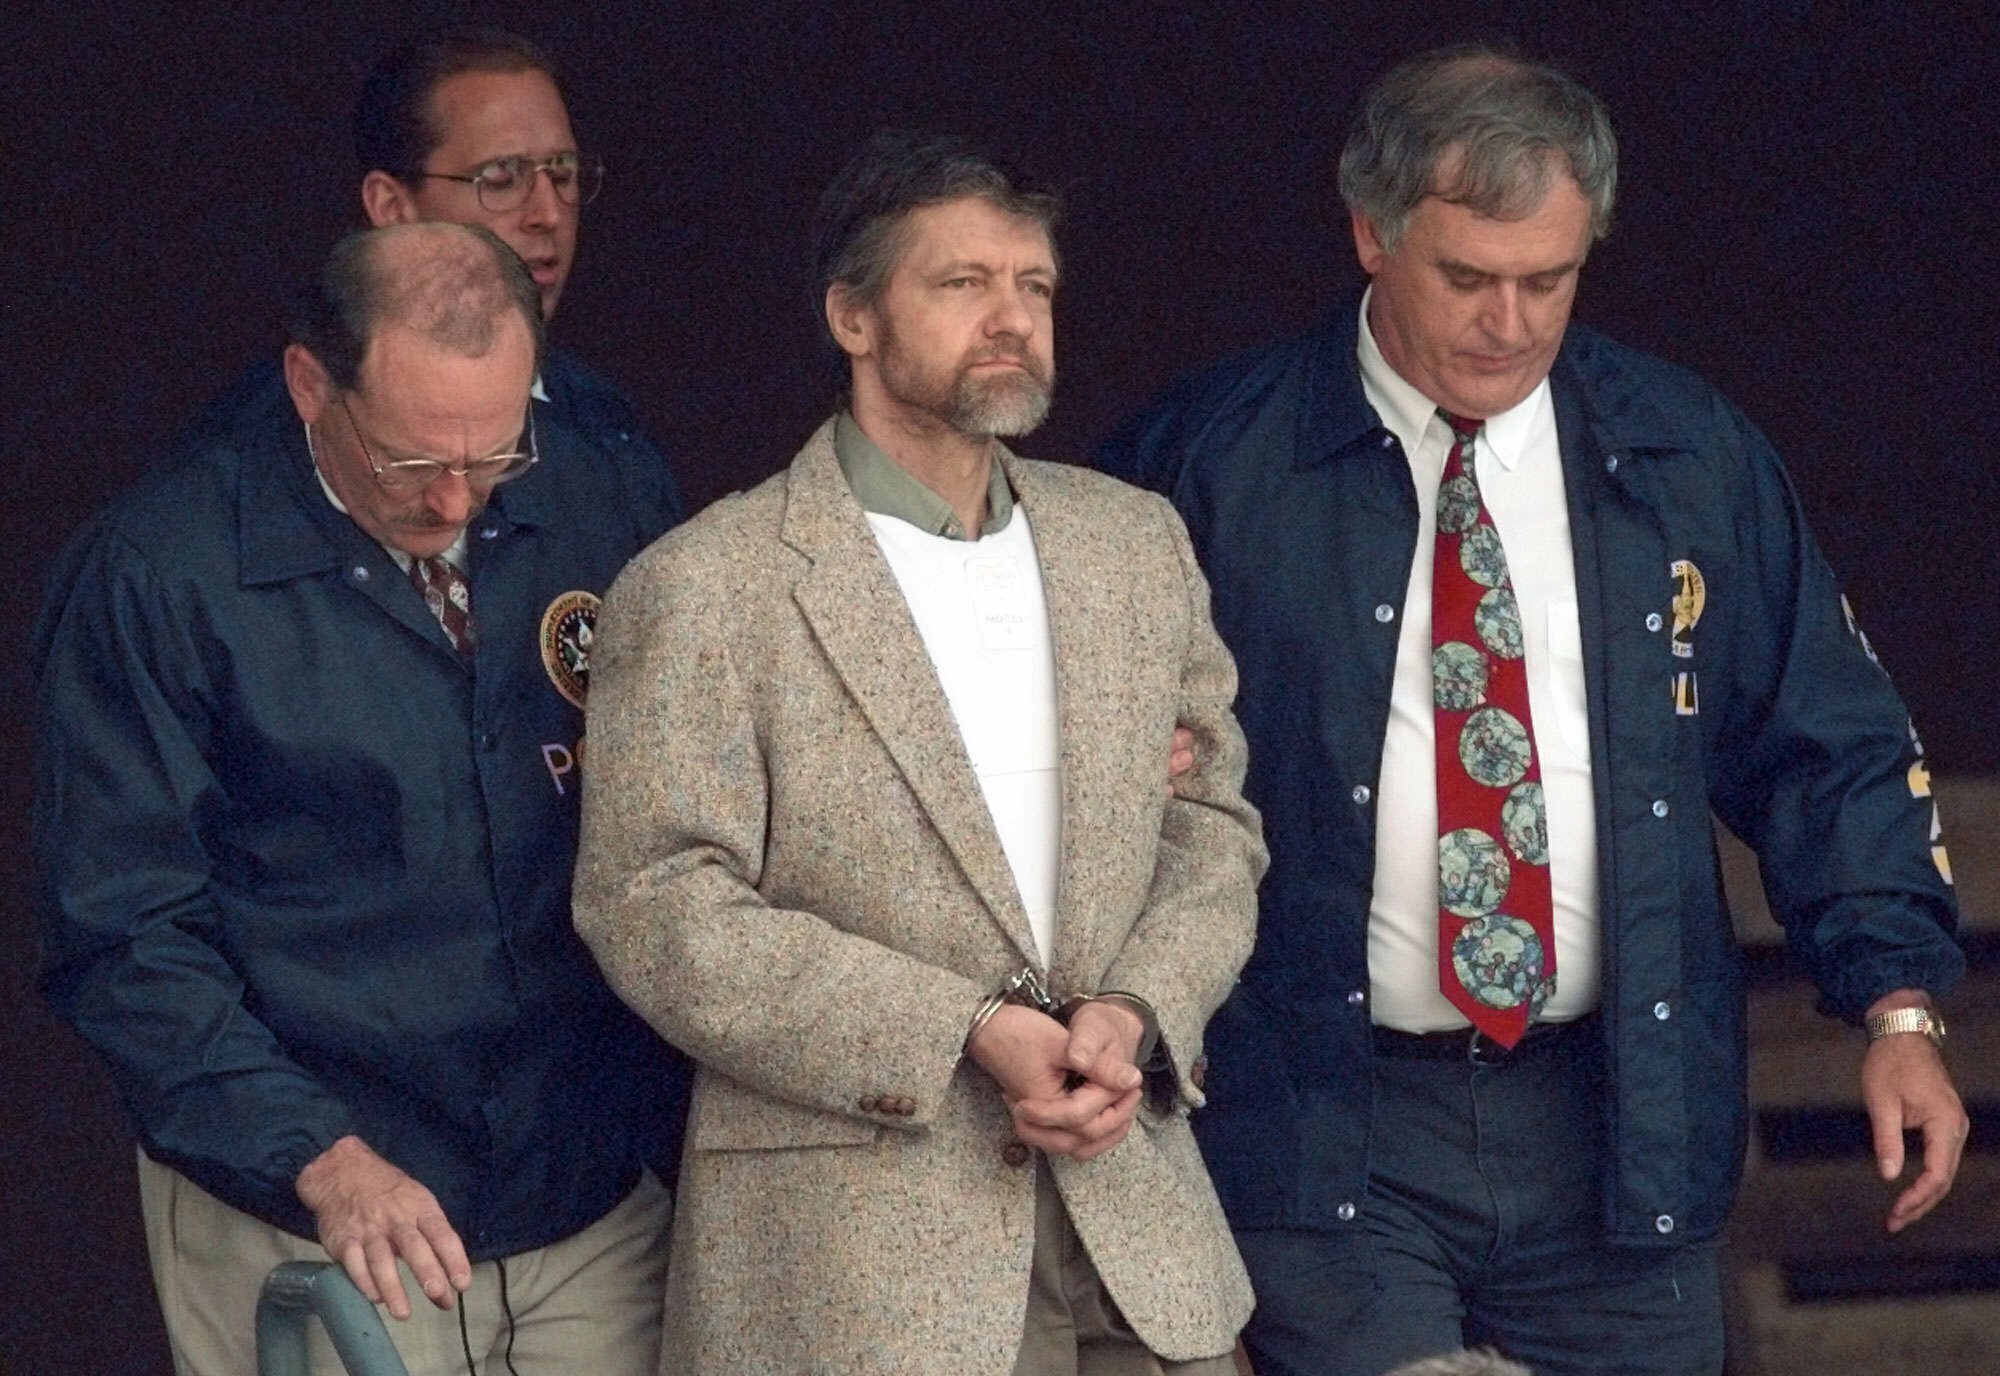 Theodore Kaczynski looks around as U.S. Marshals prepare to take him down the steps at the federal courthouse in Helena, Montana, to a waiting vehicle in a file photo from June 21, 1996. A spokesperson for the Bureau of Prisons told The Associated Press that Kaczynski, known as the “Unabomber,” has died in federal prison.